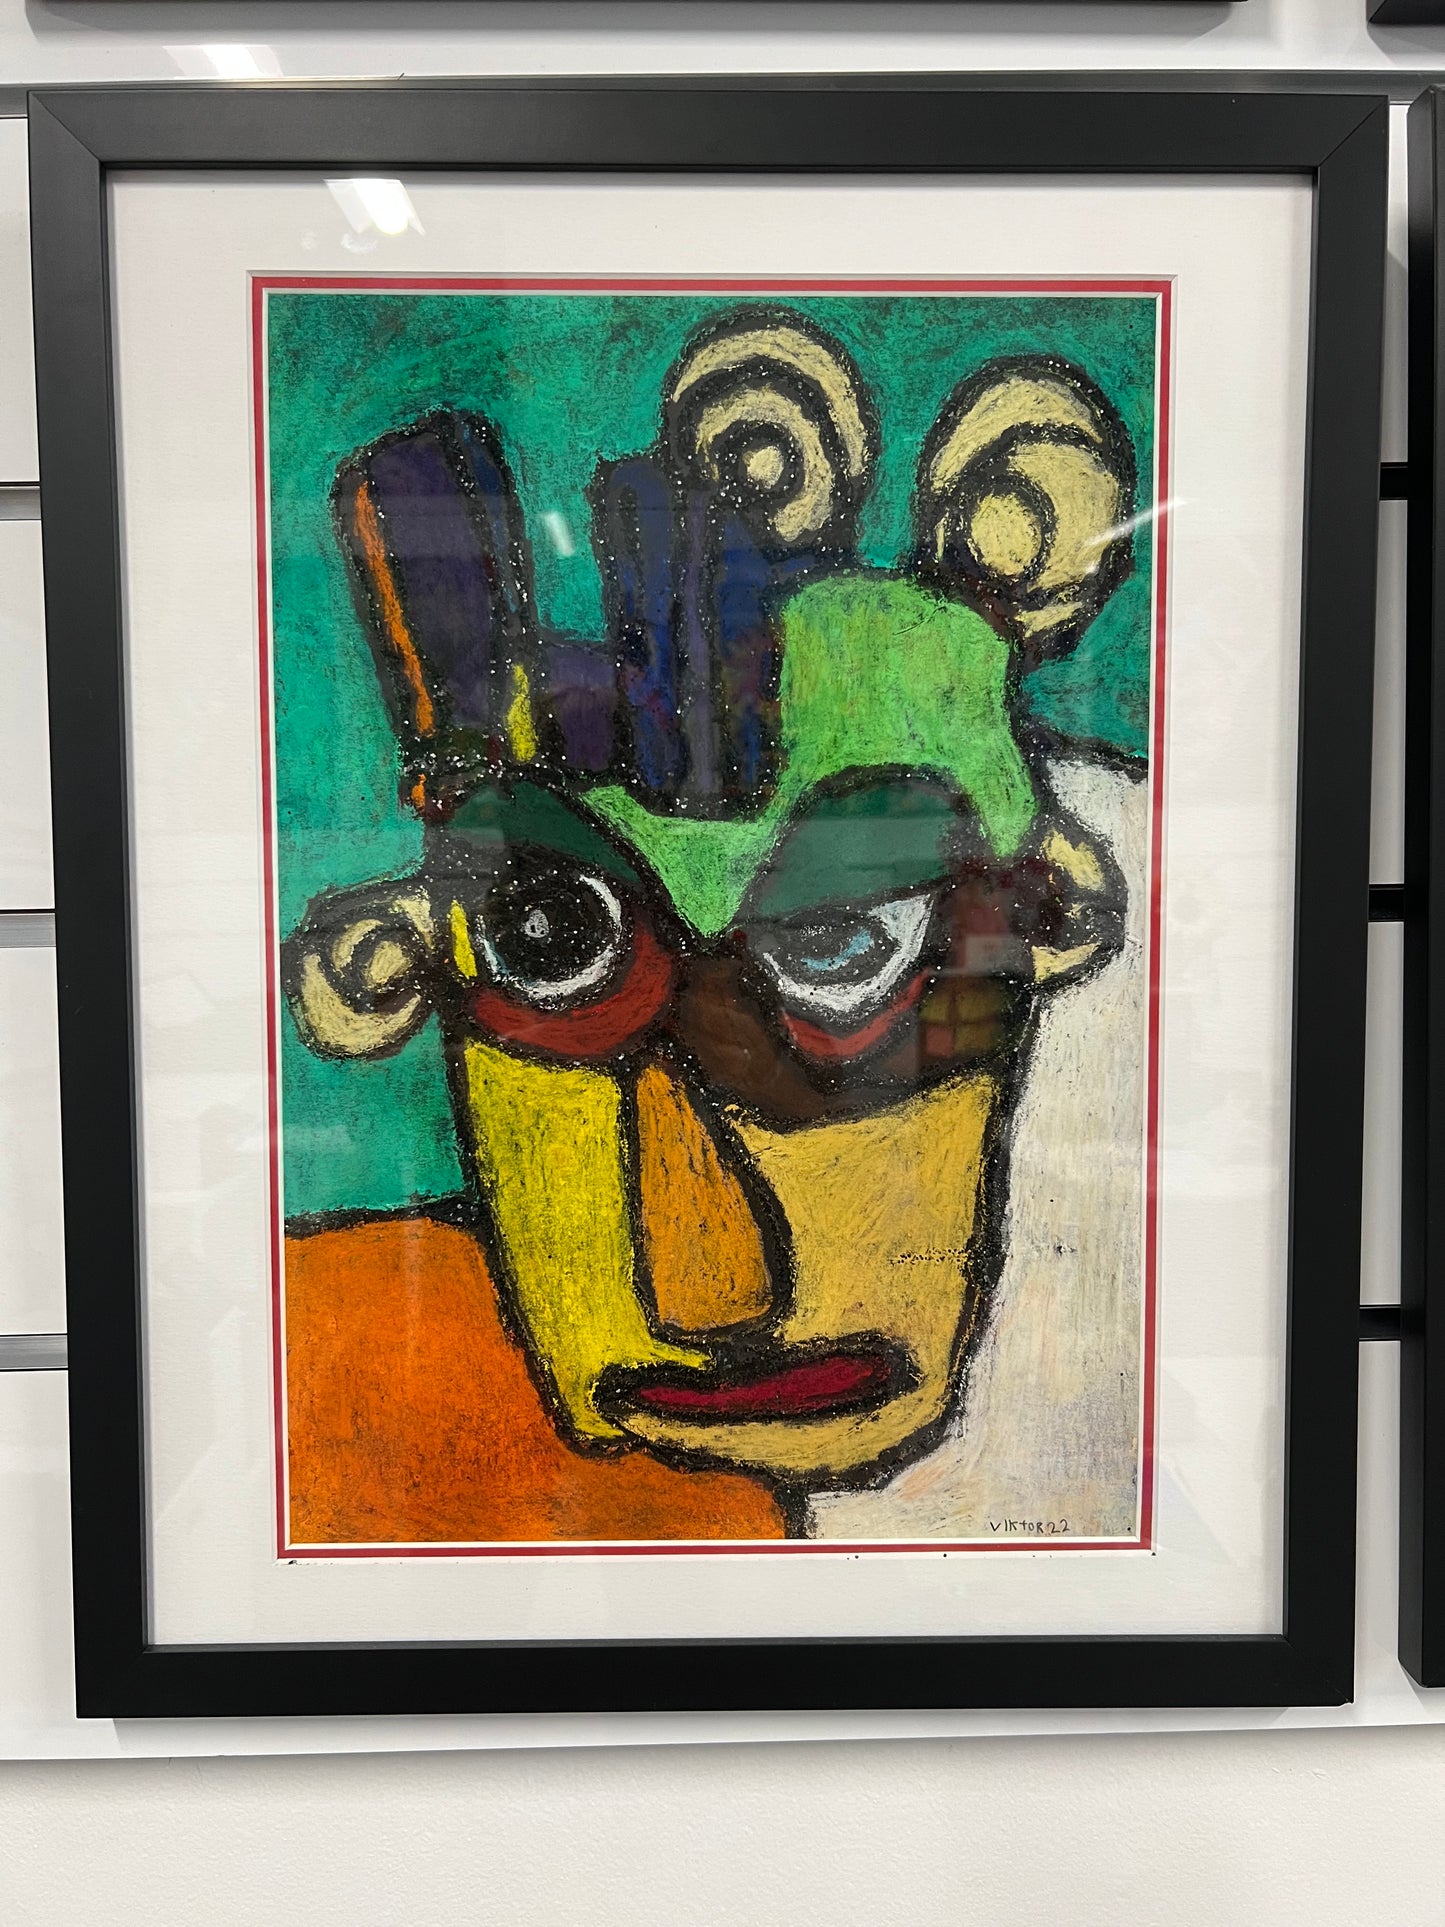 Face - Picasso style with glitter - ORIGINAL 12x17” FRAMED